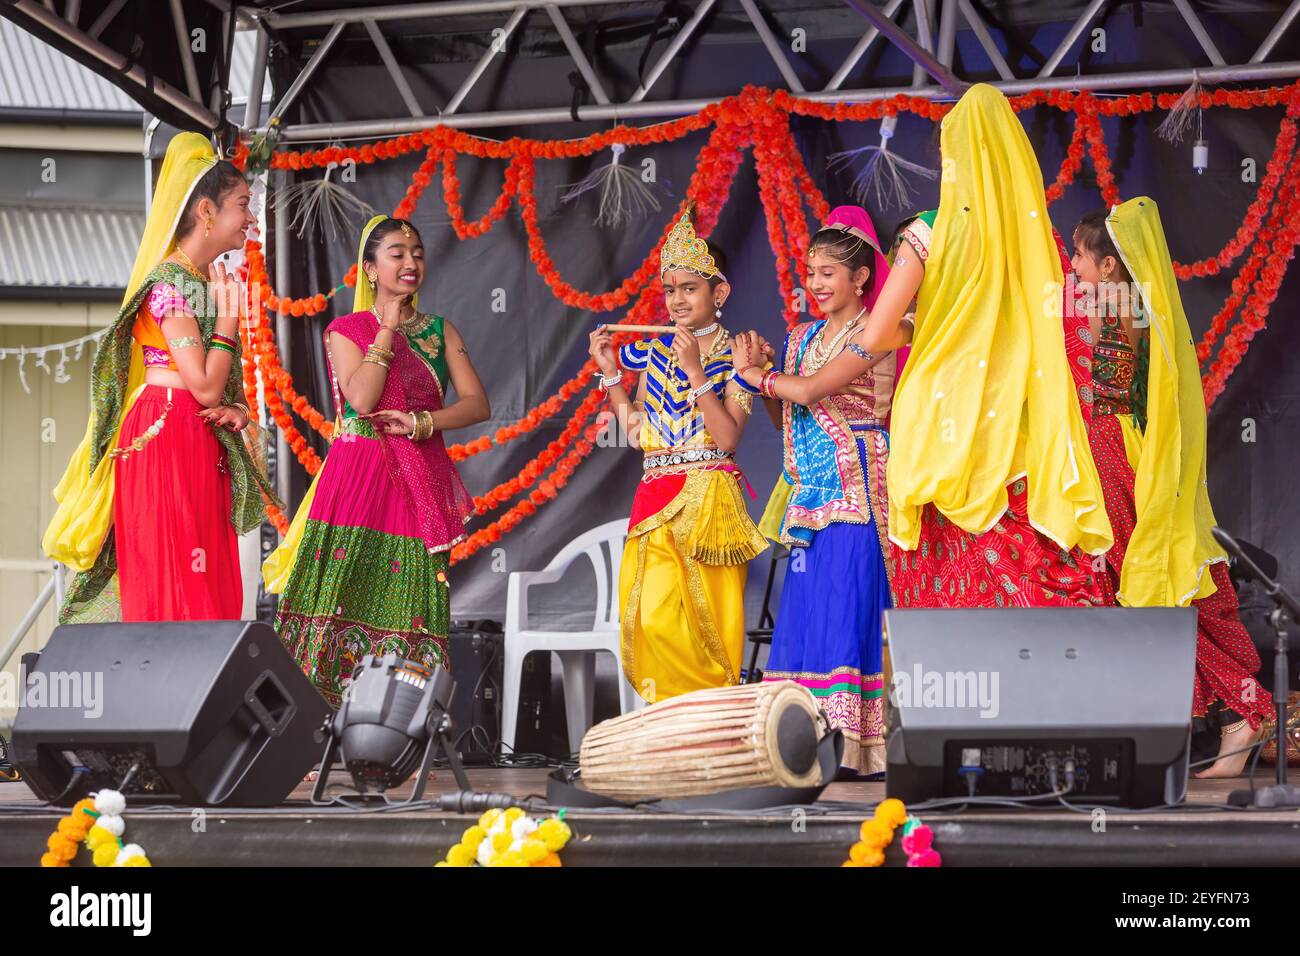 Young Indian girls in colorful traditional clothing performing on stage during celebrations of Diwali, the Hindu festival of light Stock Photo